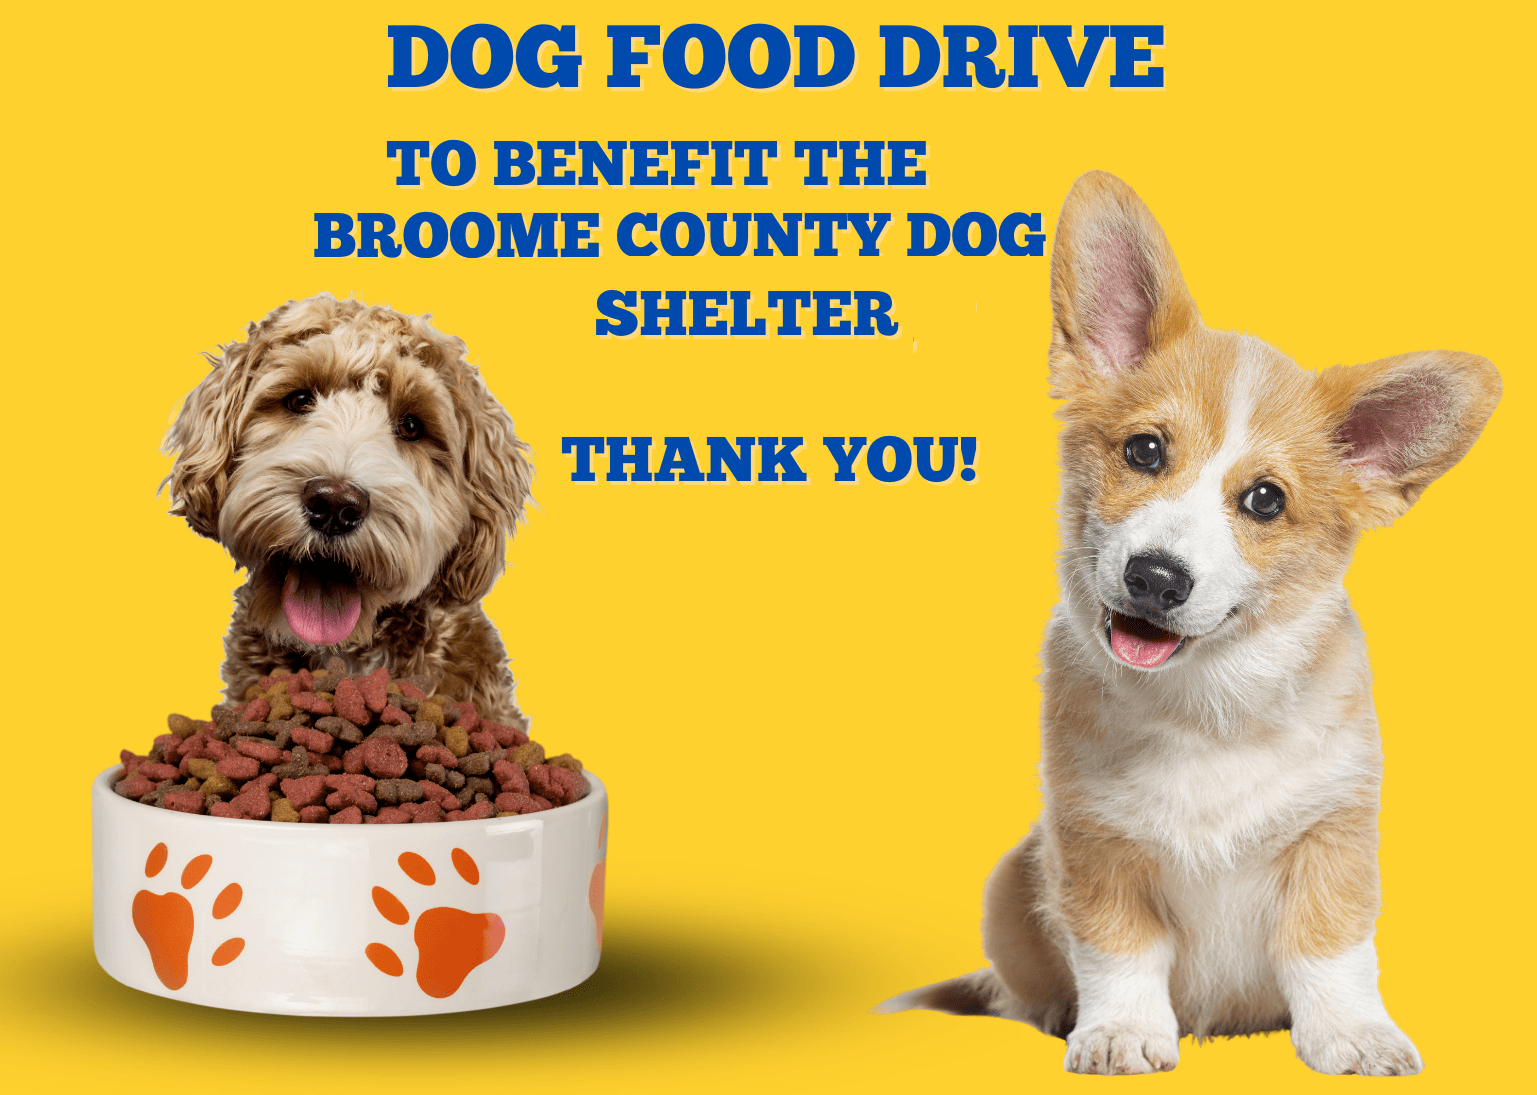 Dog Food Drive to Benefit the Broome County Dog Shelter. Thank You